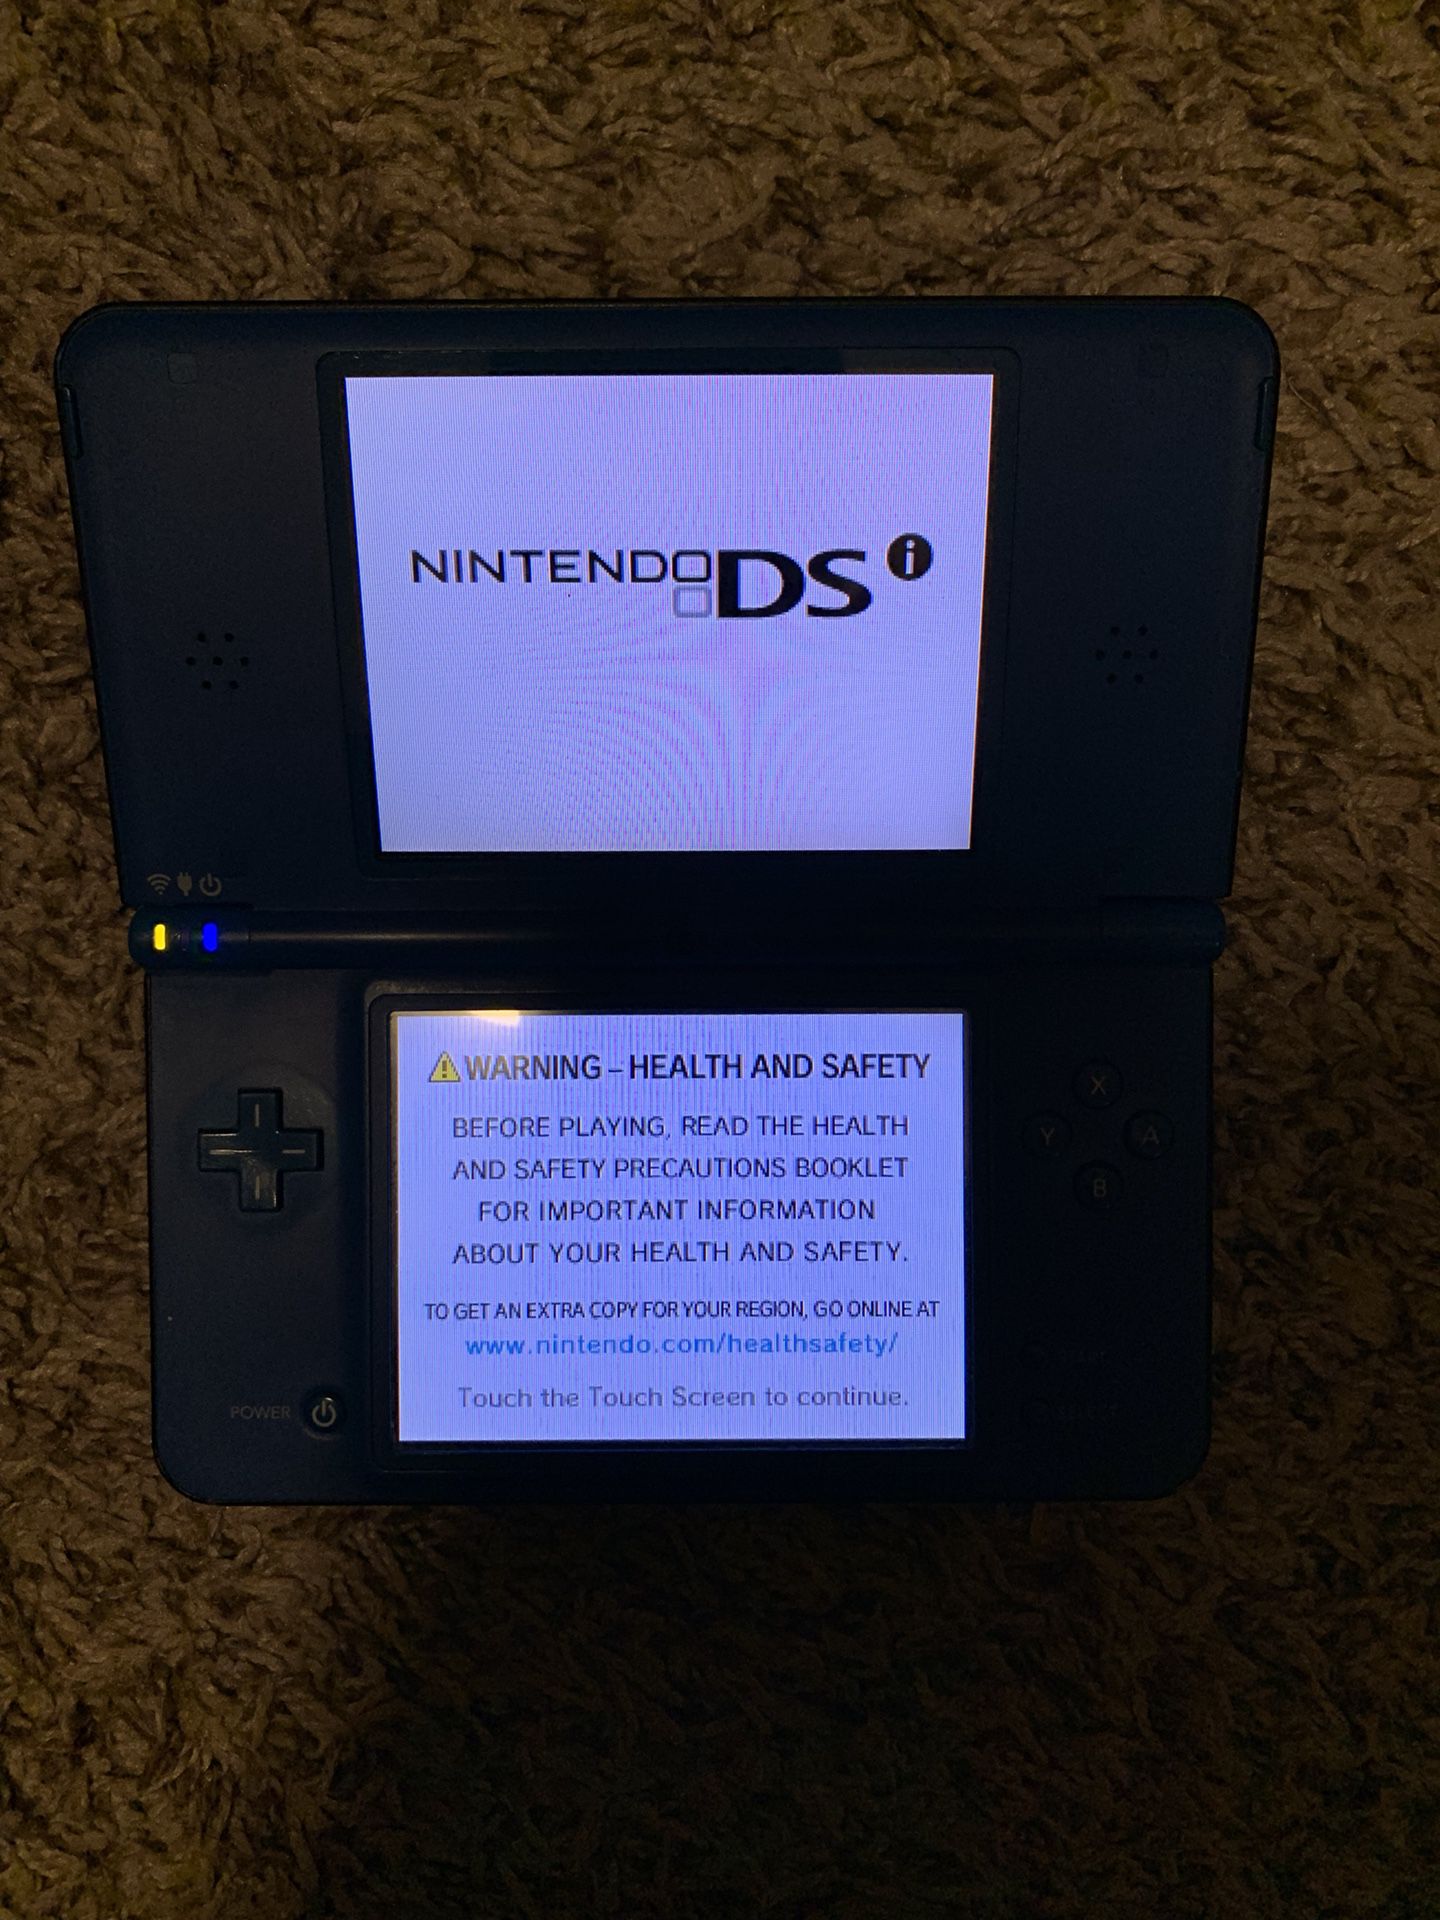 NINTENDO DSI XL HANDHELD CONSOLE SYSTEM WITH VIDEO GAME